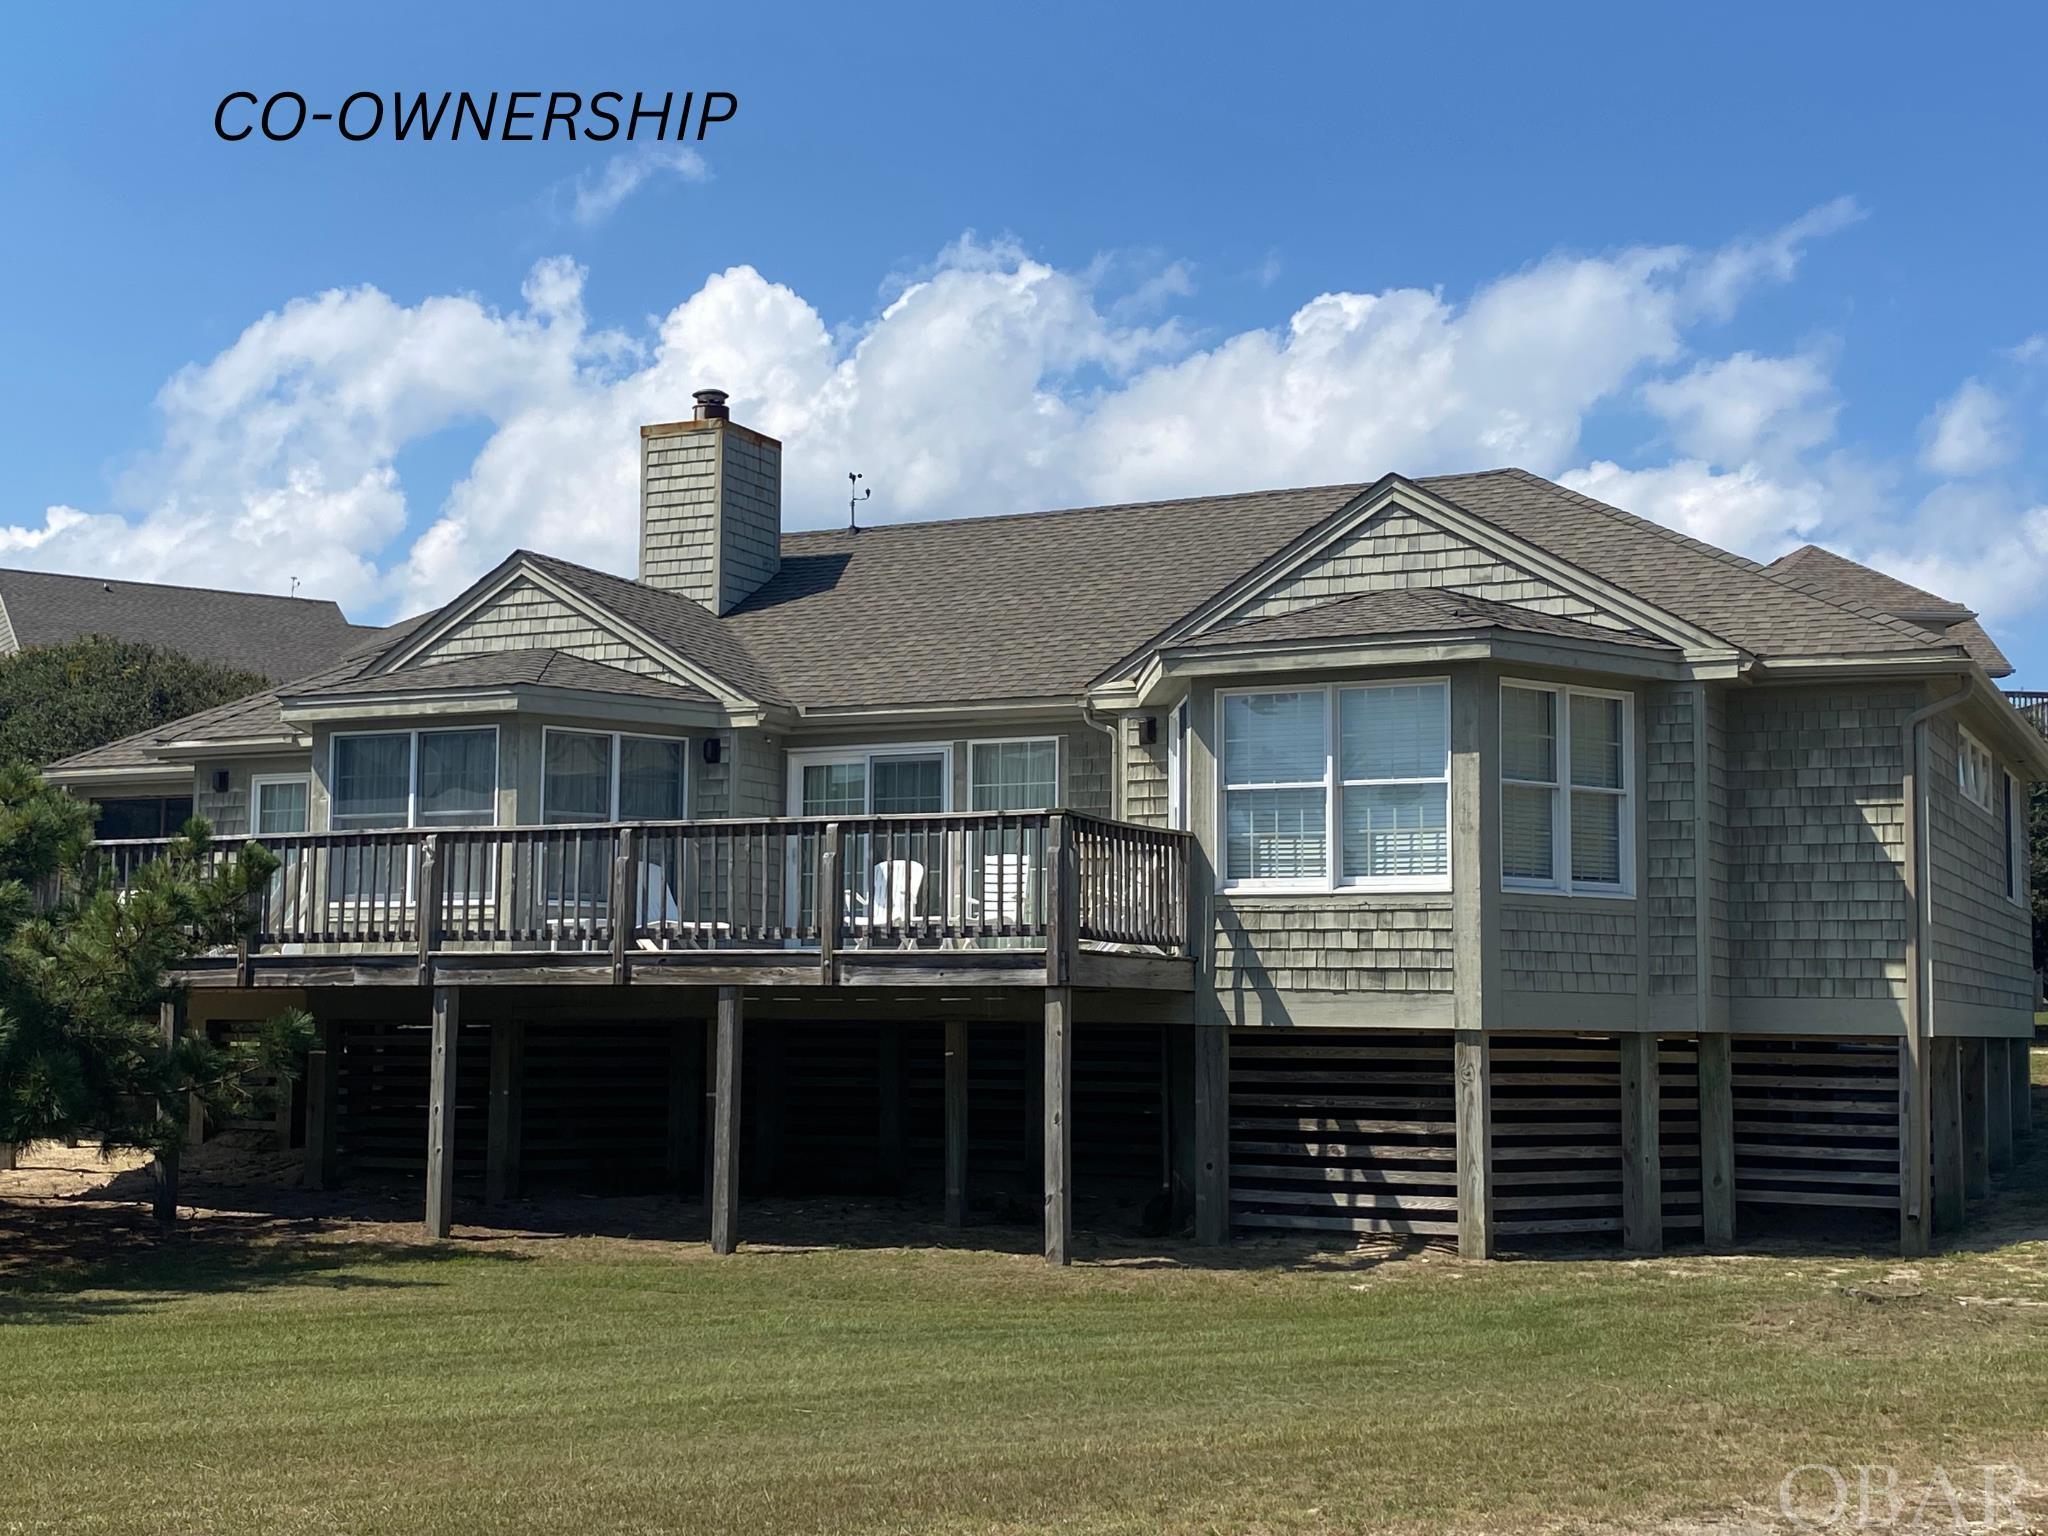 131 Ships Watch Drive, Duck, NC 27949, 4 Bedrooms Bedrooms, ,3 BathroomsBathrooms,Residential,For Sale,Ships Watch Drive,123860